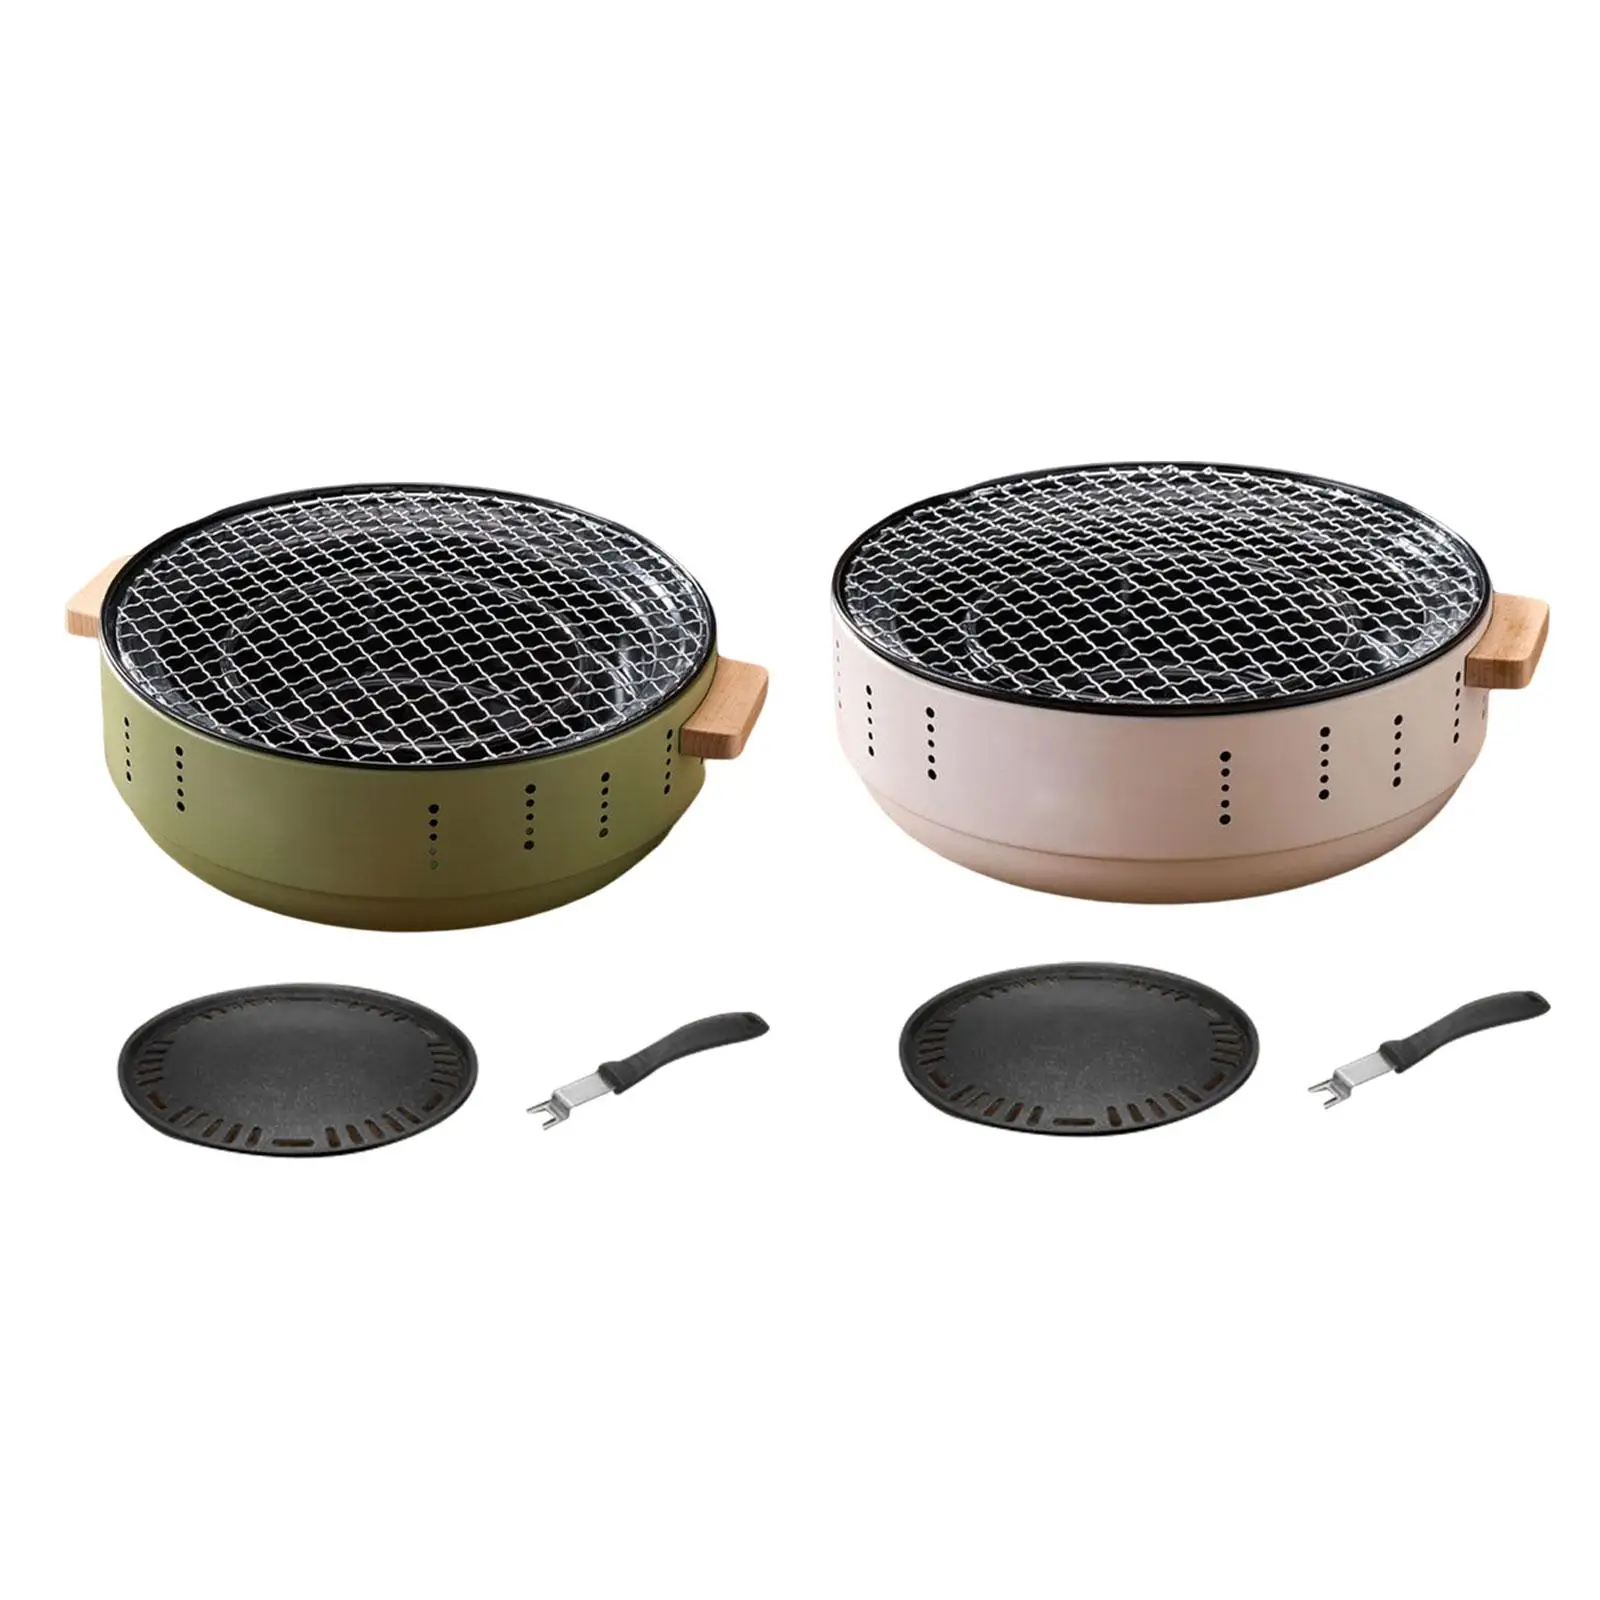 Portable Barbecue Grill Bakeware Lightweight Multifunctional for Outdoor Indoor Backpacking